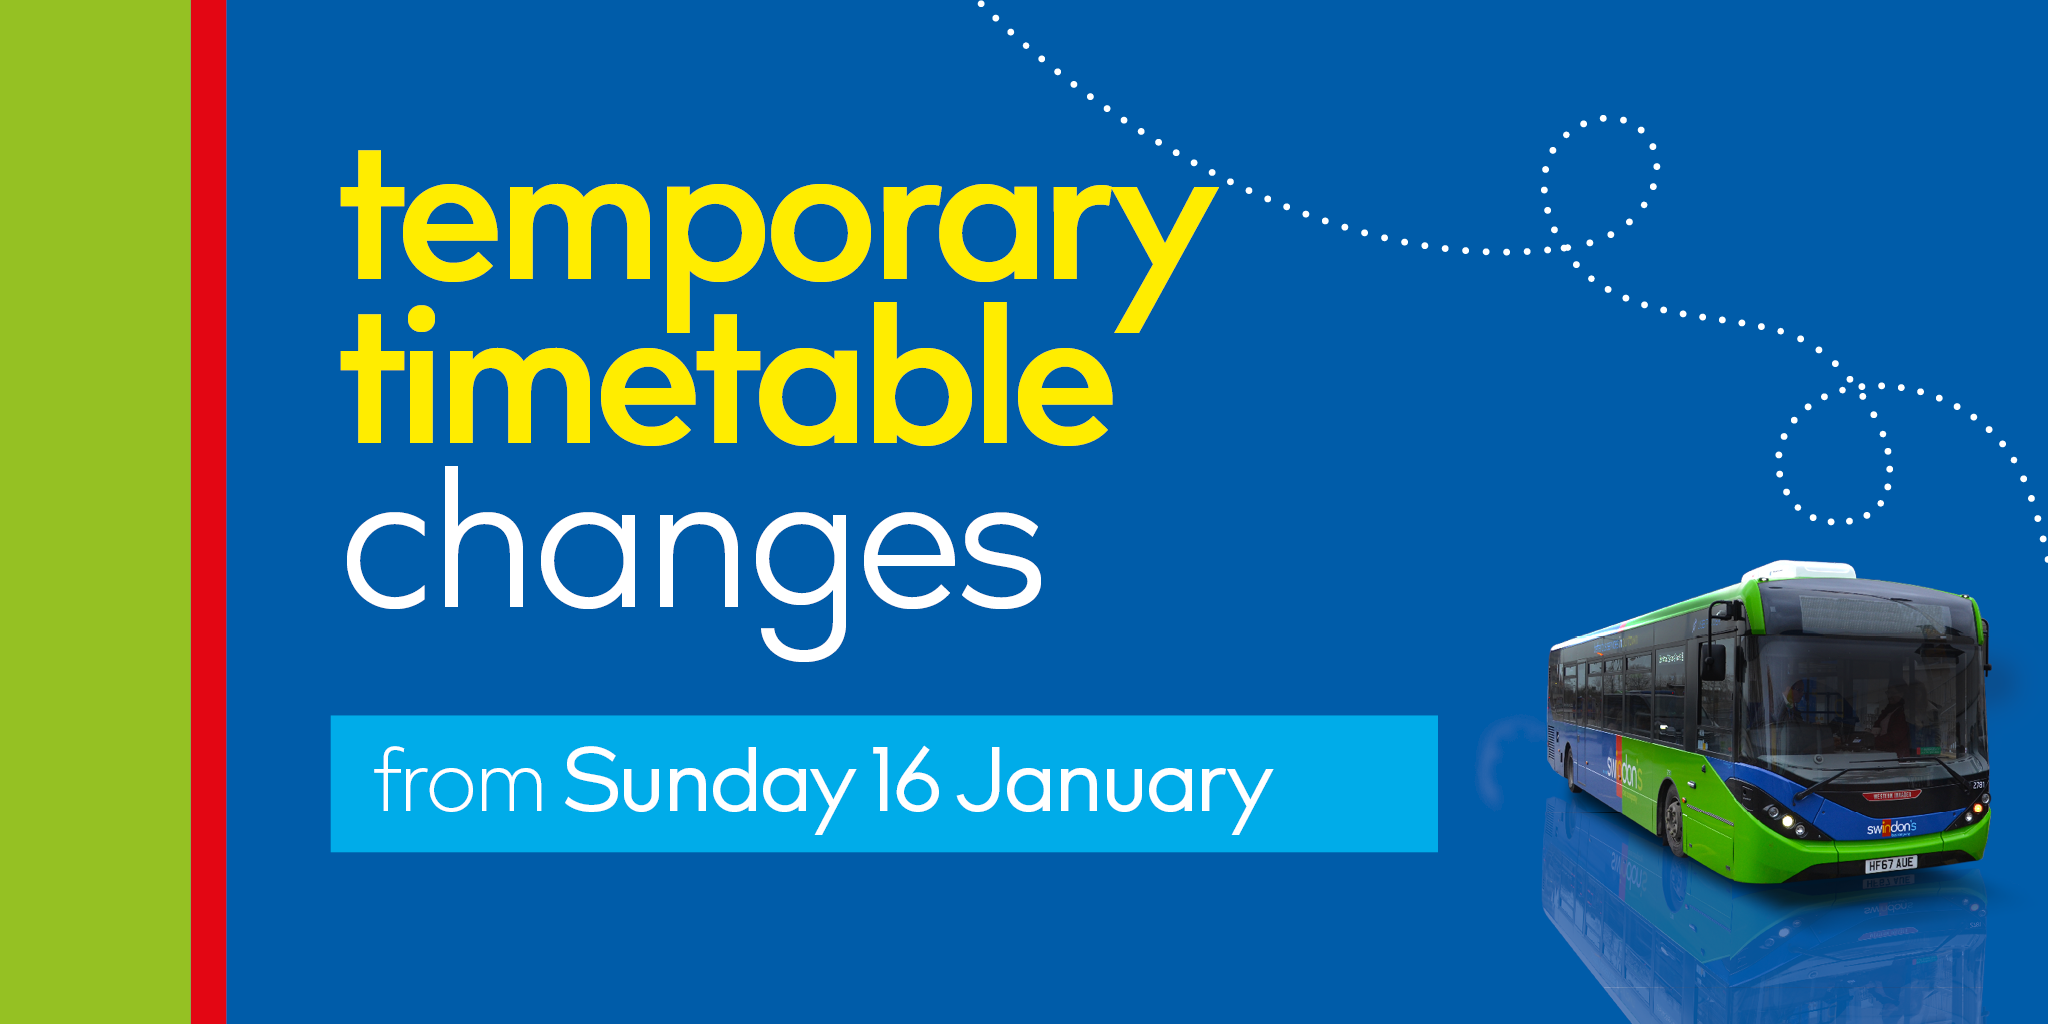 From Sunday 16th January, there are several changes taking place to our services